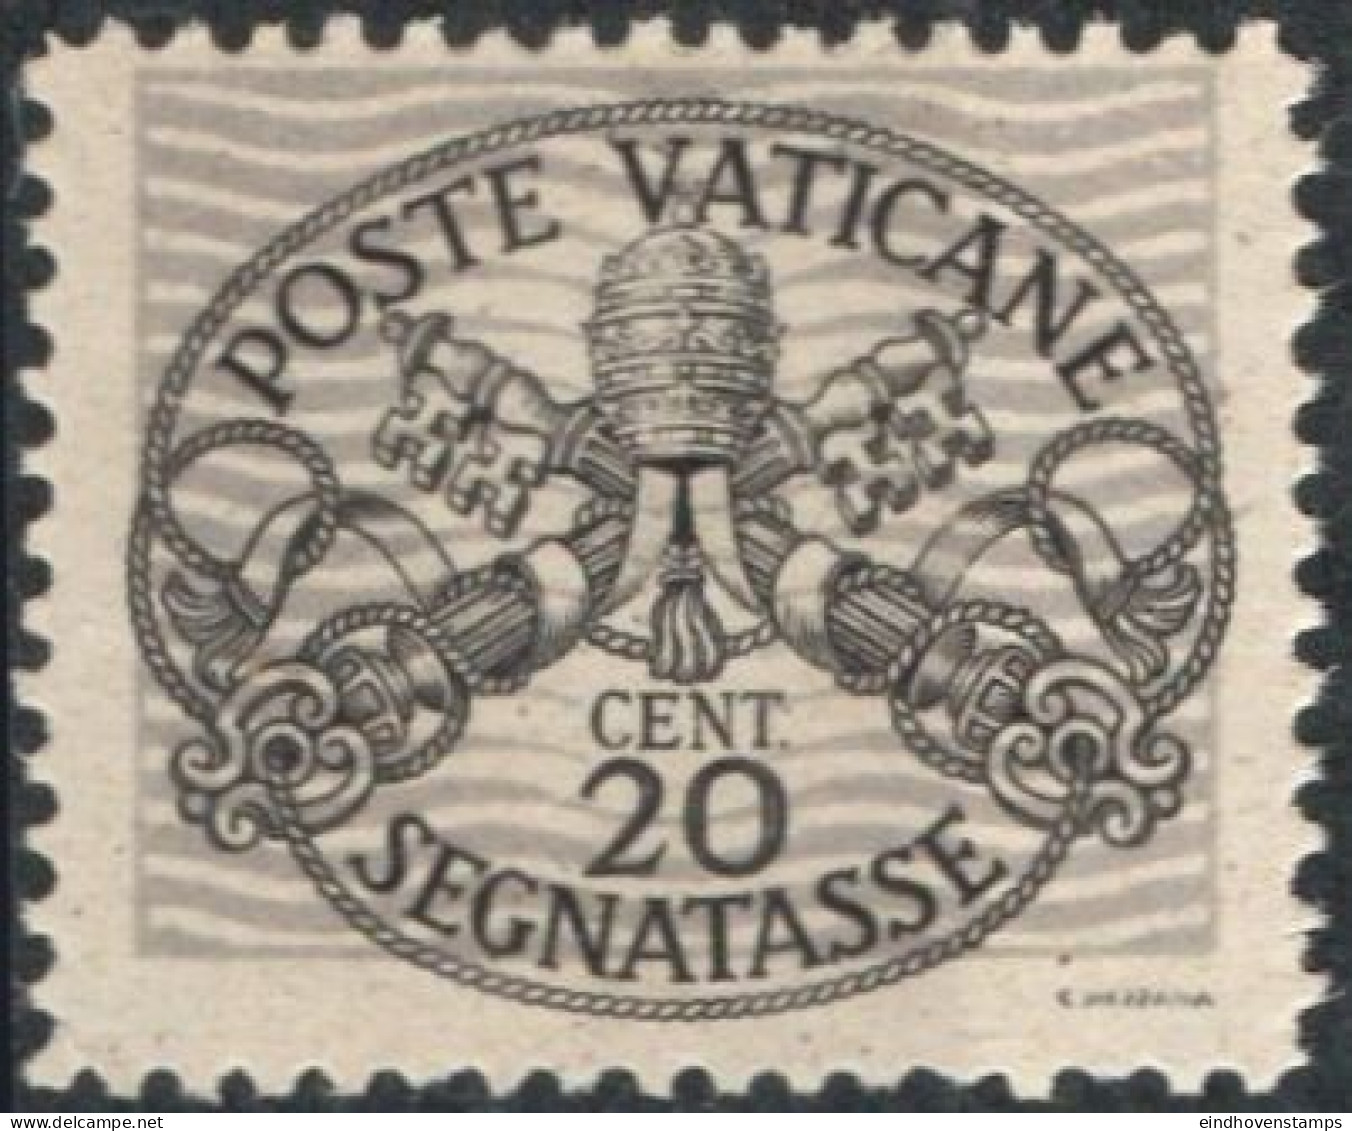 Vatican 1945, Postage Due 20c With Wide Grey Lines 1 Value Mi P8-xII  MNH - Taxes